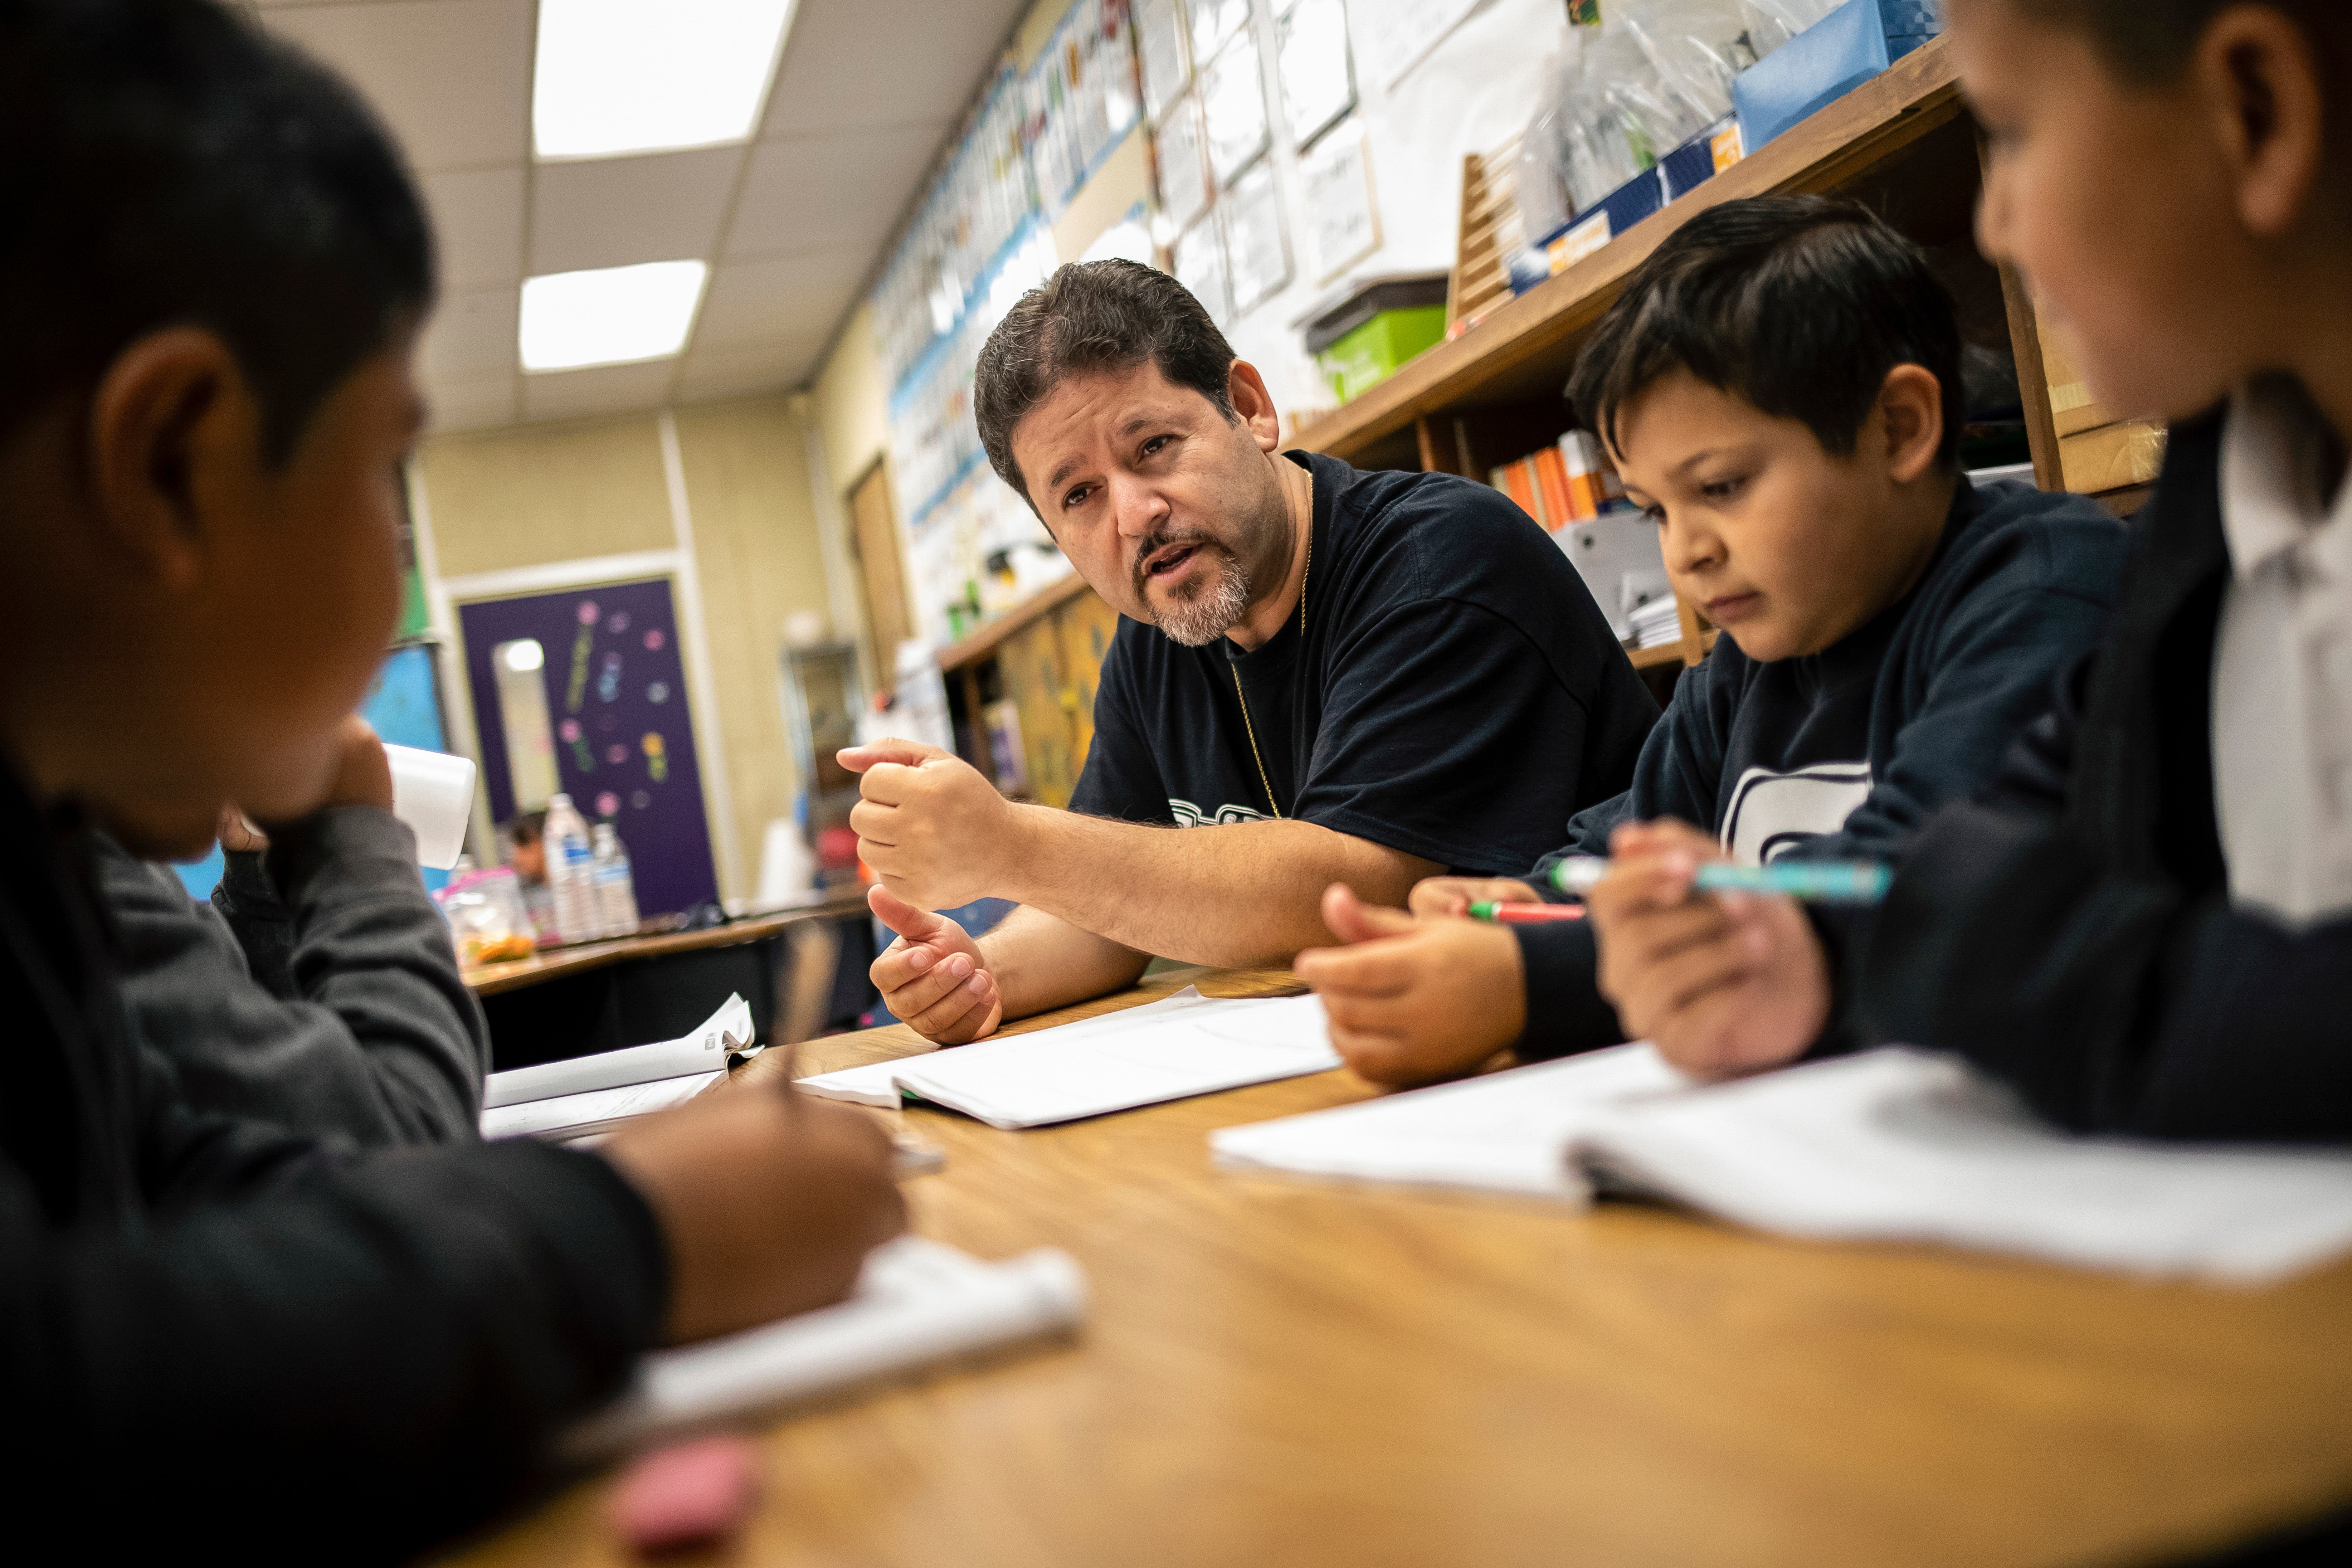 Third-grade teacher Oscar Ramos believes pesticide exposure is causing a spike in learning disorders among his students.